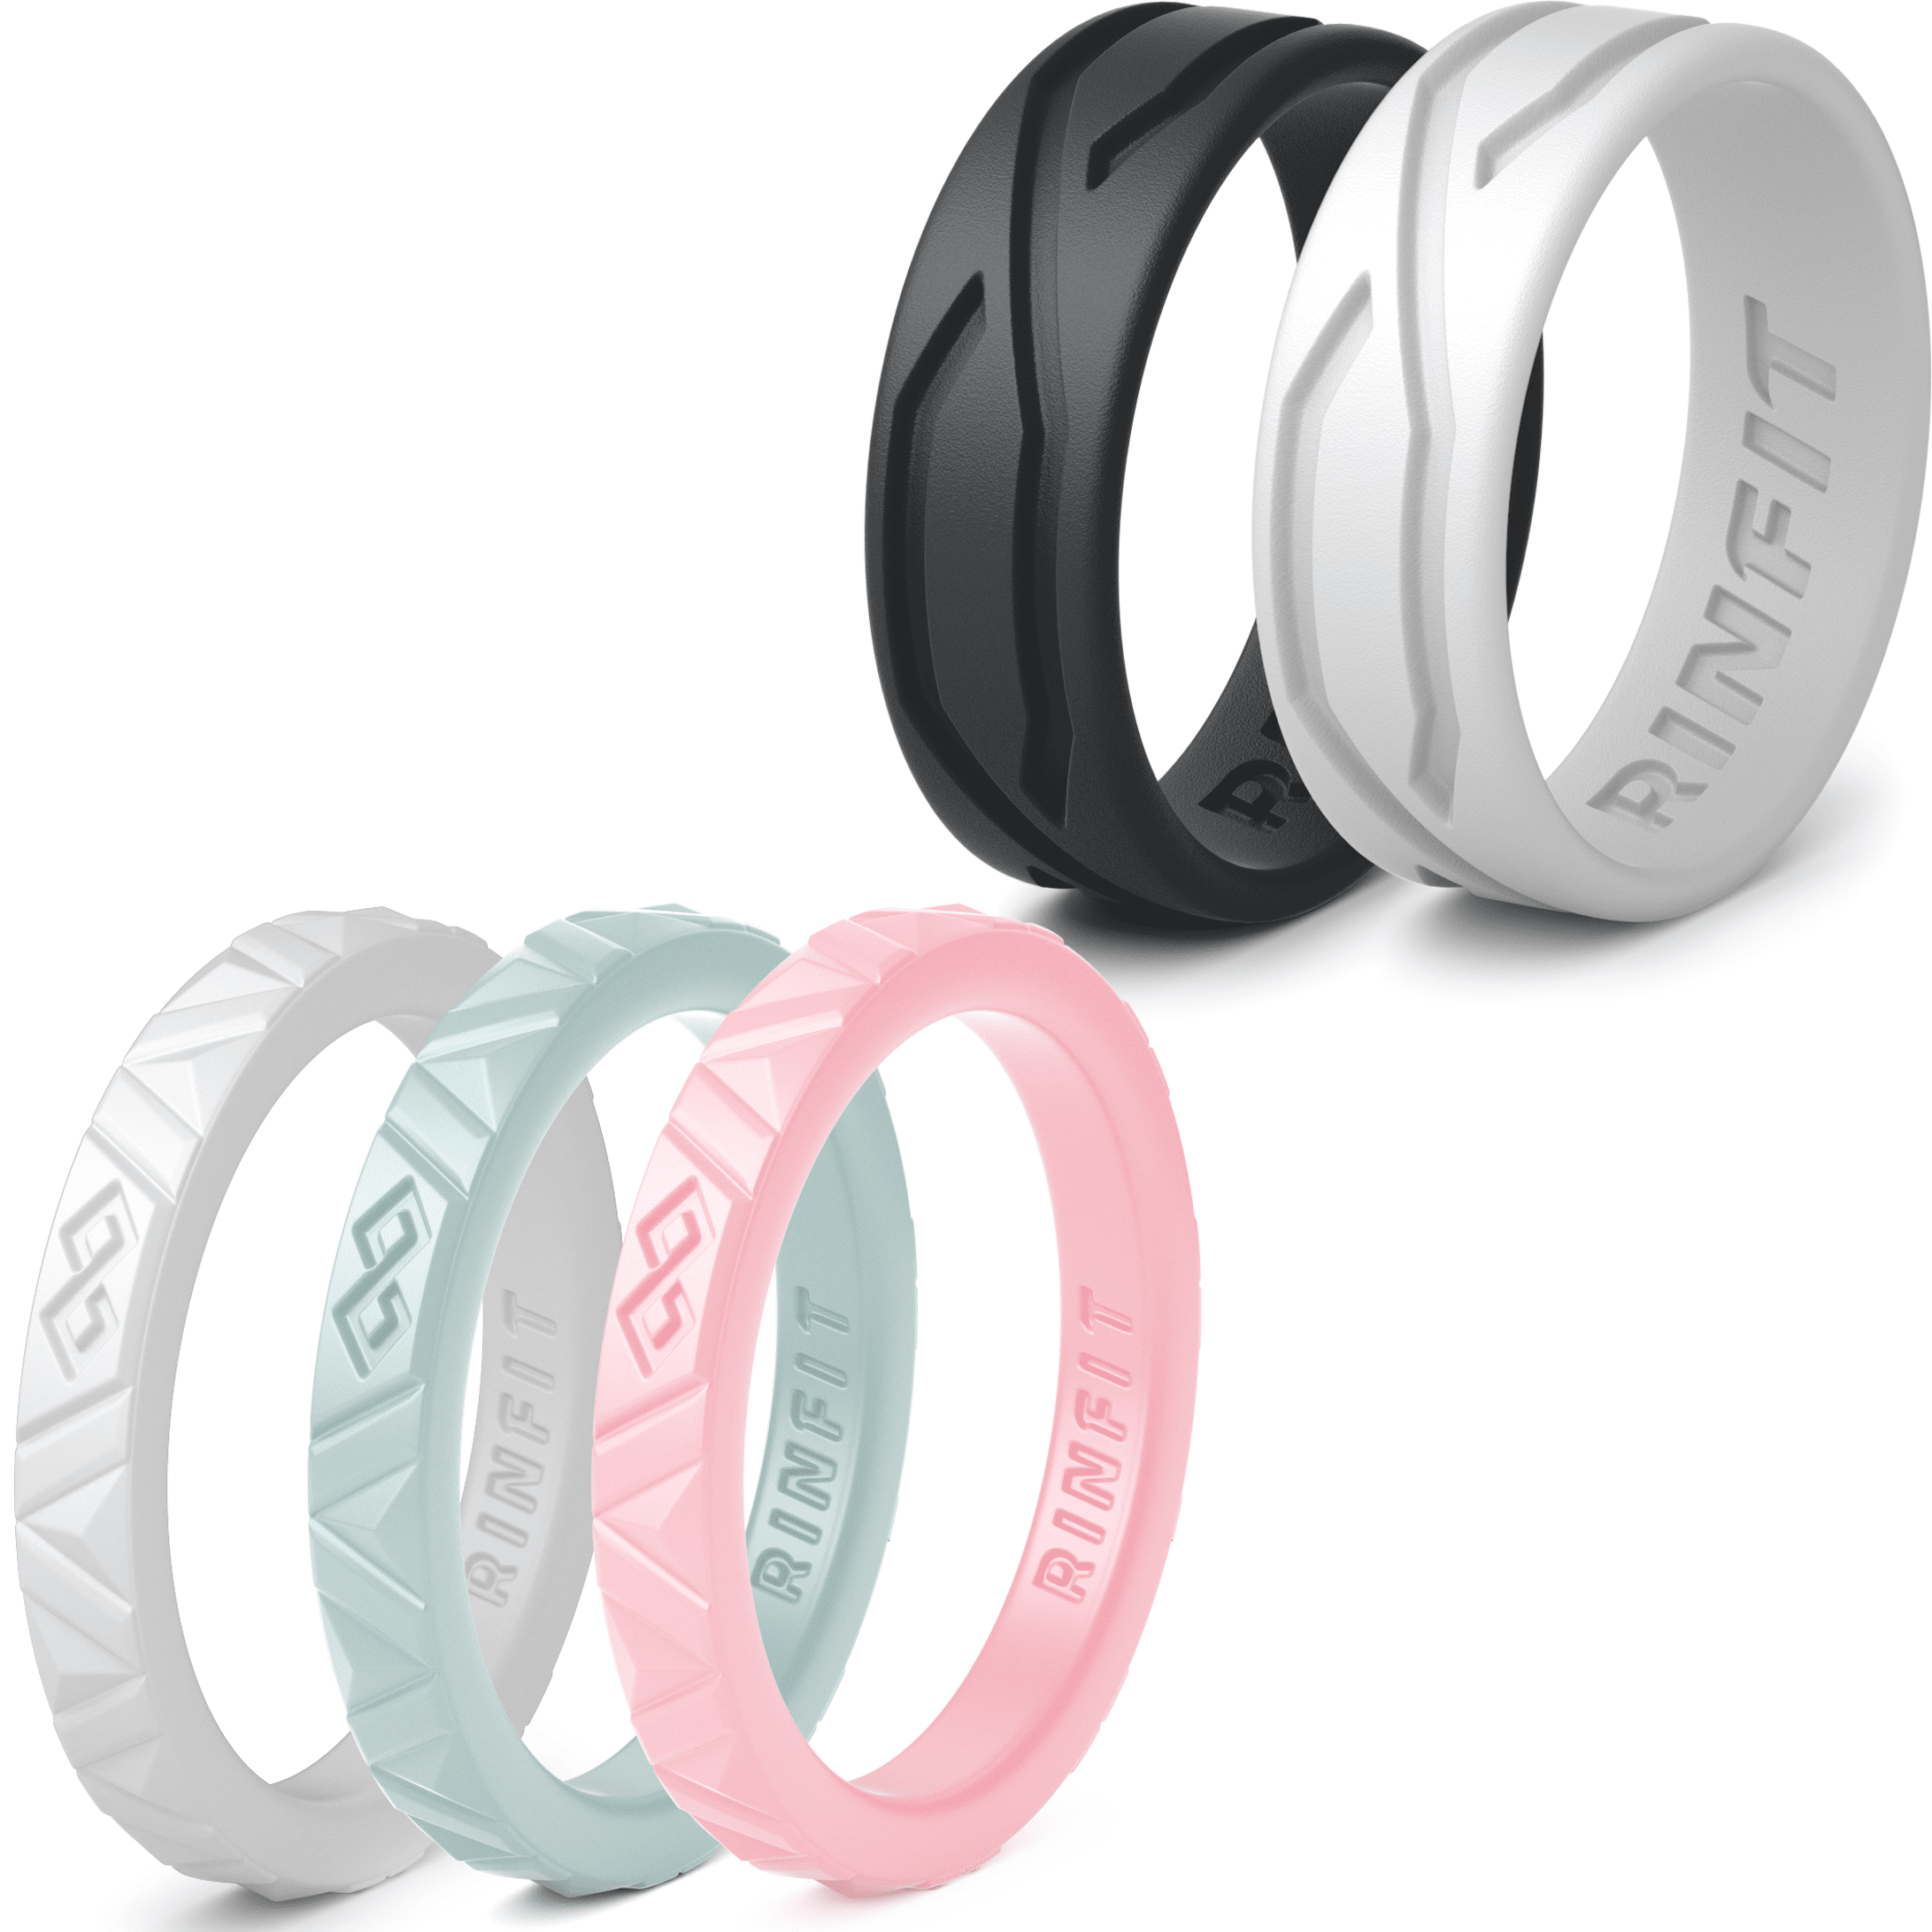 Stackable Women's Rubber Engagement Bands Rinfit Silicone Wedding Rings for Women U.S Design Patent Pending 